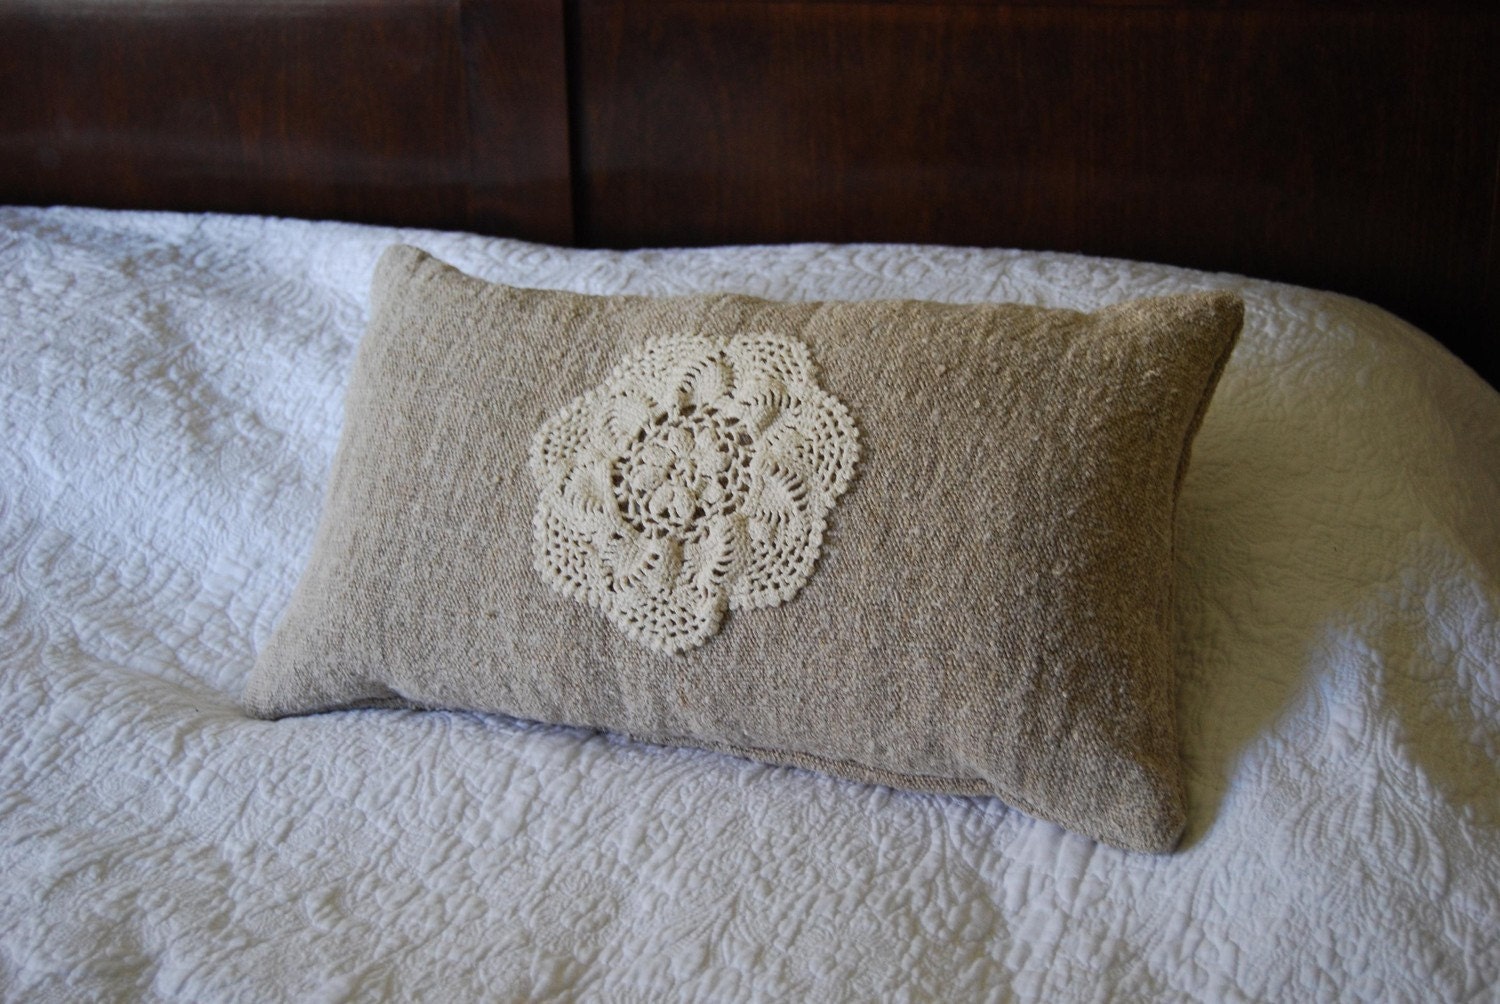 Antique oatmeal hemp and vintage doily pillow with kapok filling handmade